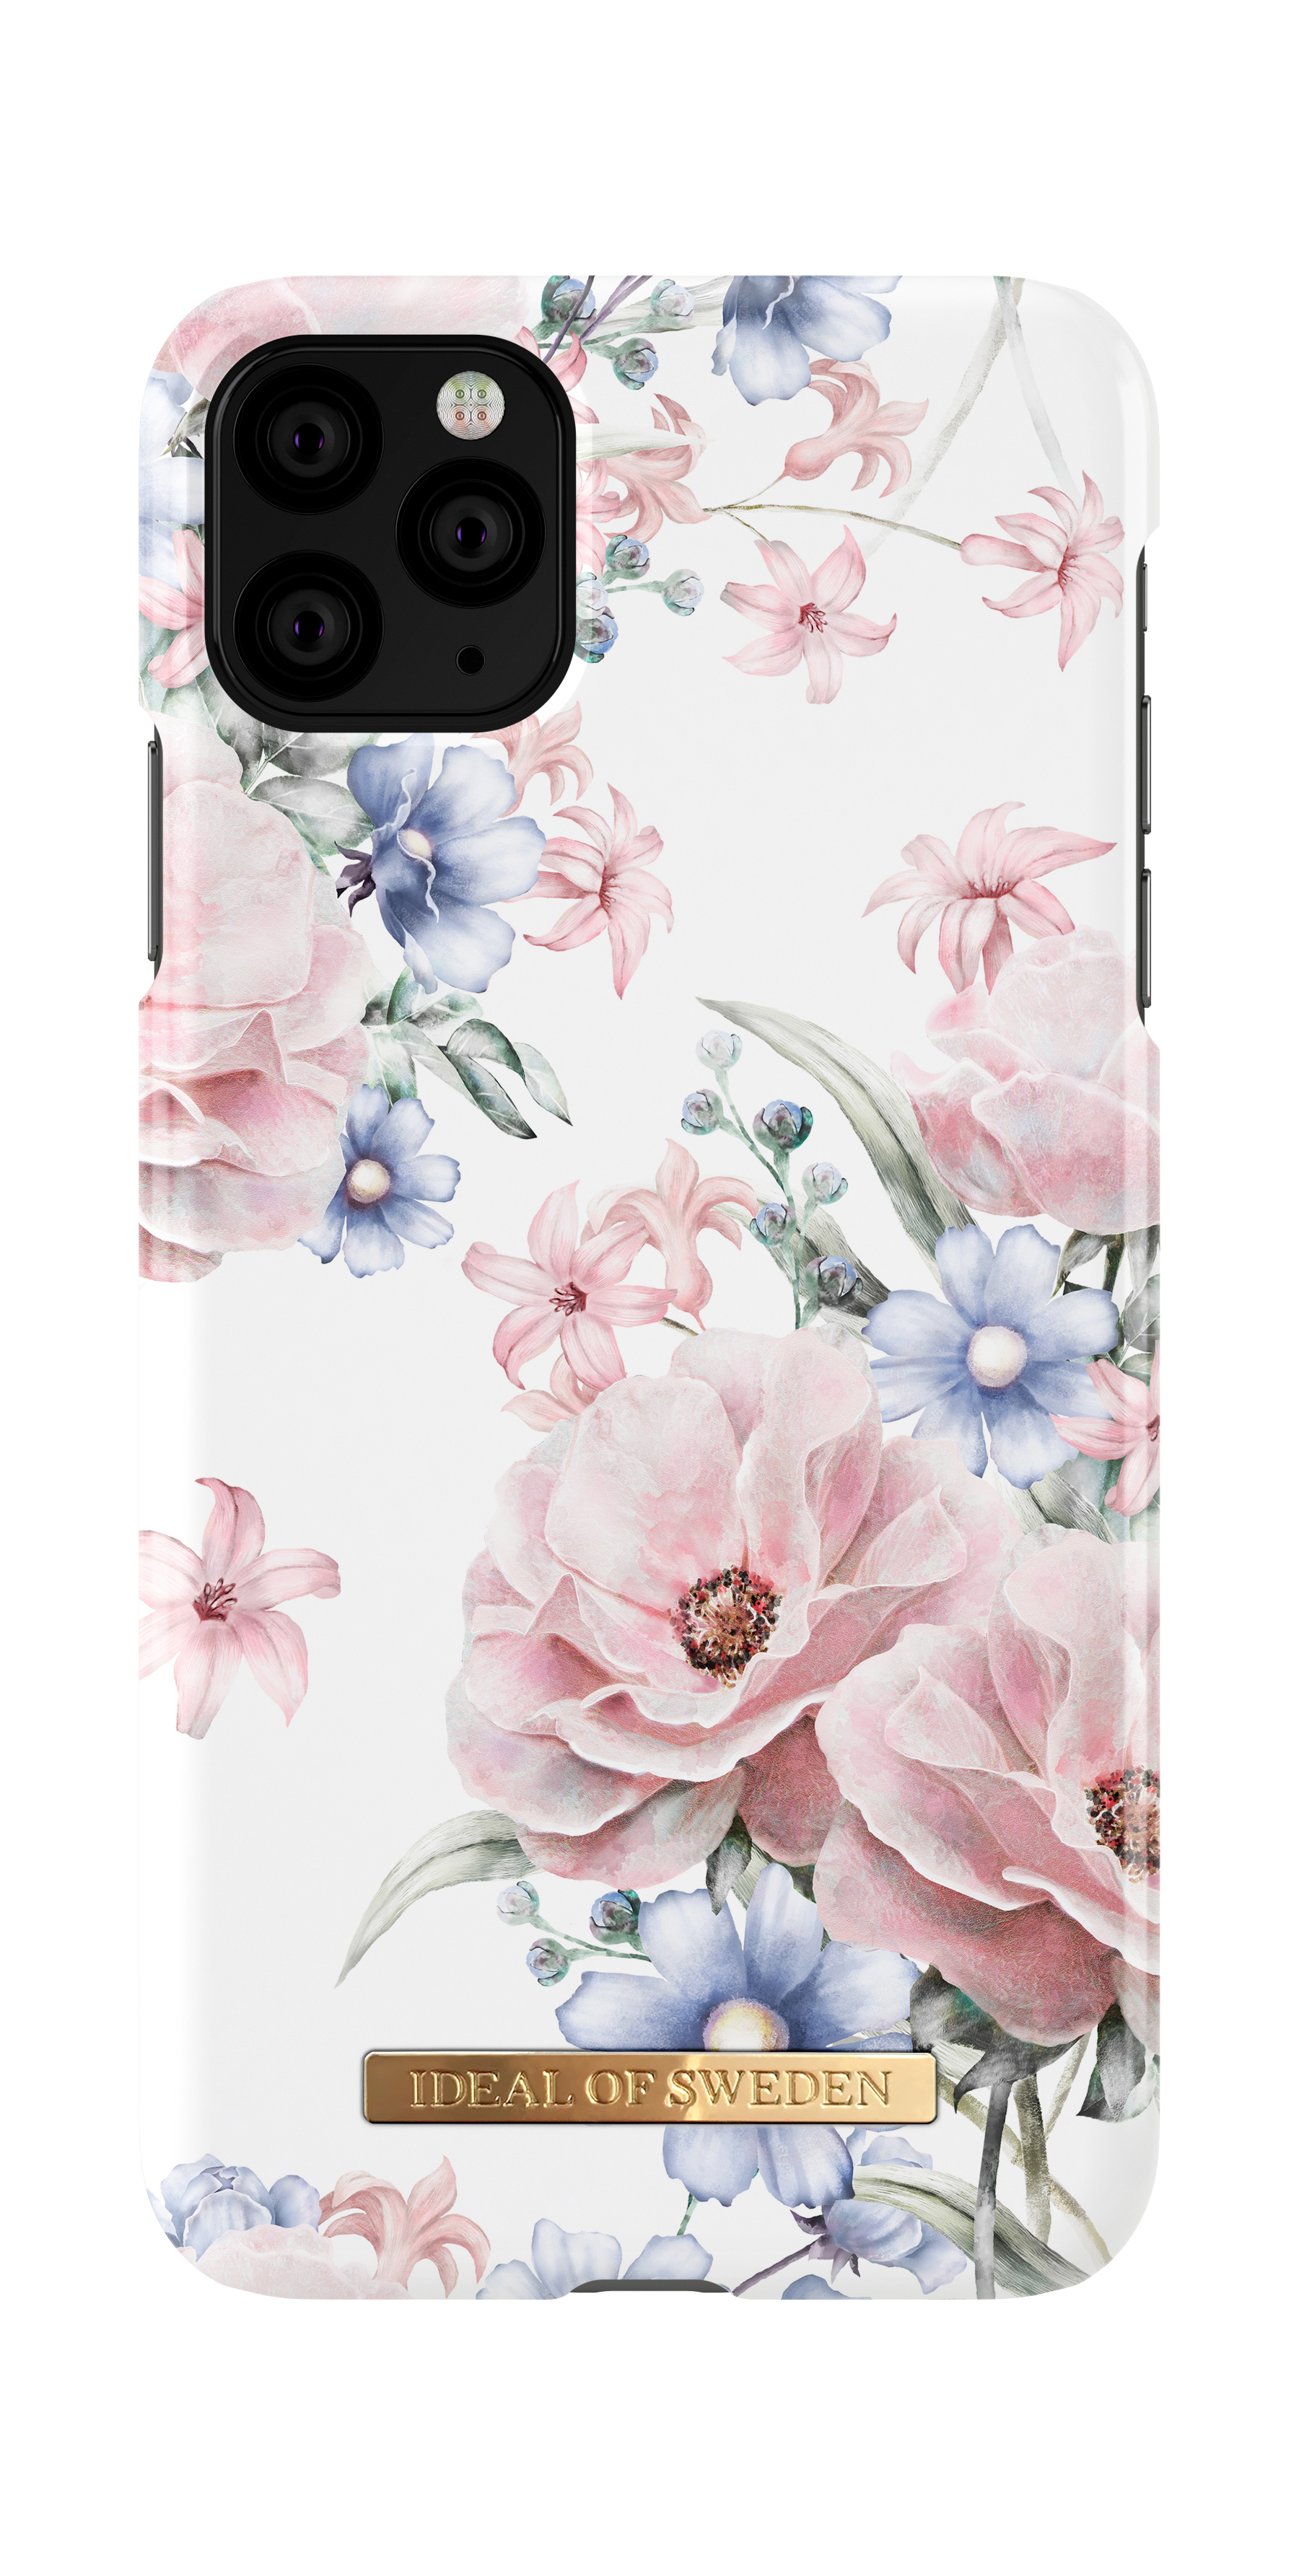 IDEAL OF SWEDEN Case, Backcover, 11 iPhone Apple, Weiß/Rosa Fashion Pro Max